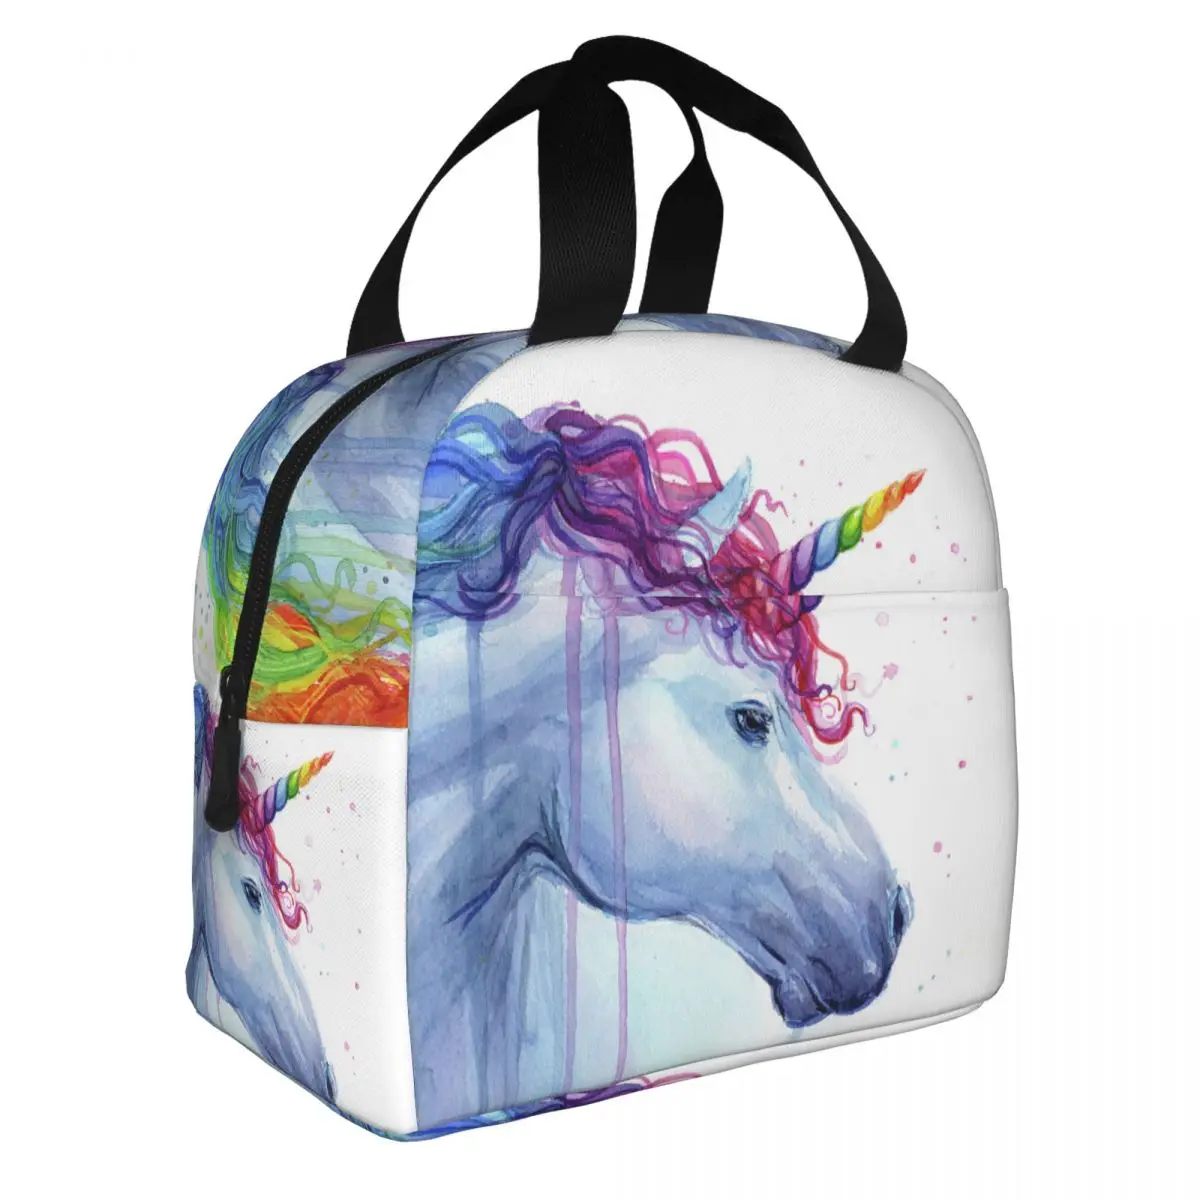 

Cartoon Rainbow Unicorn Lunch Bag Women Cooler Thermal Insulated Lunch Box for Kids School Children Work Picnic Food Tote Bags